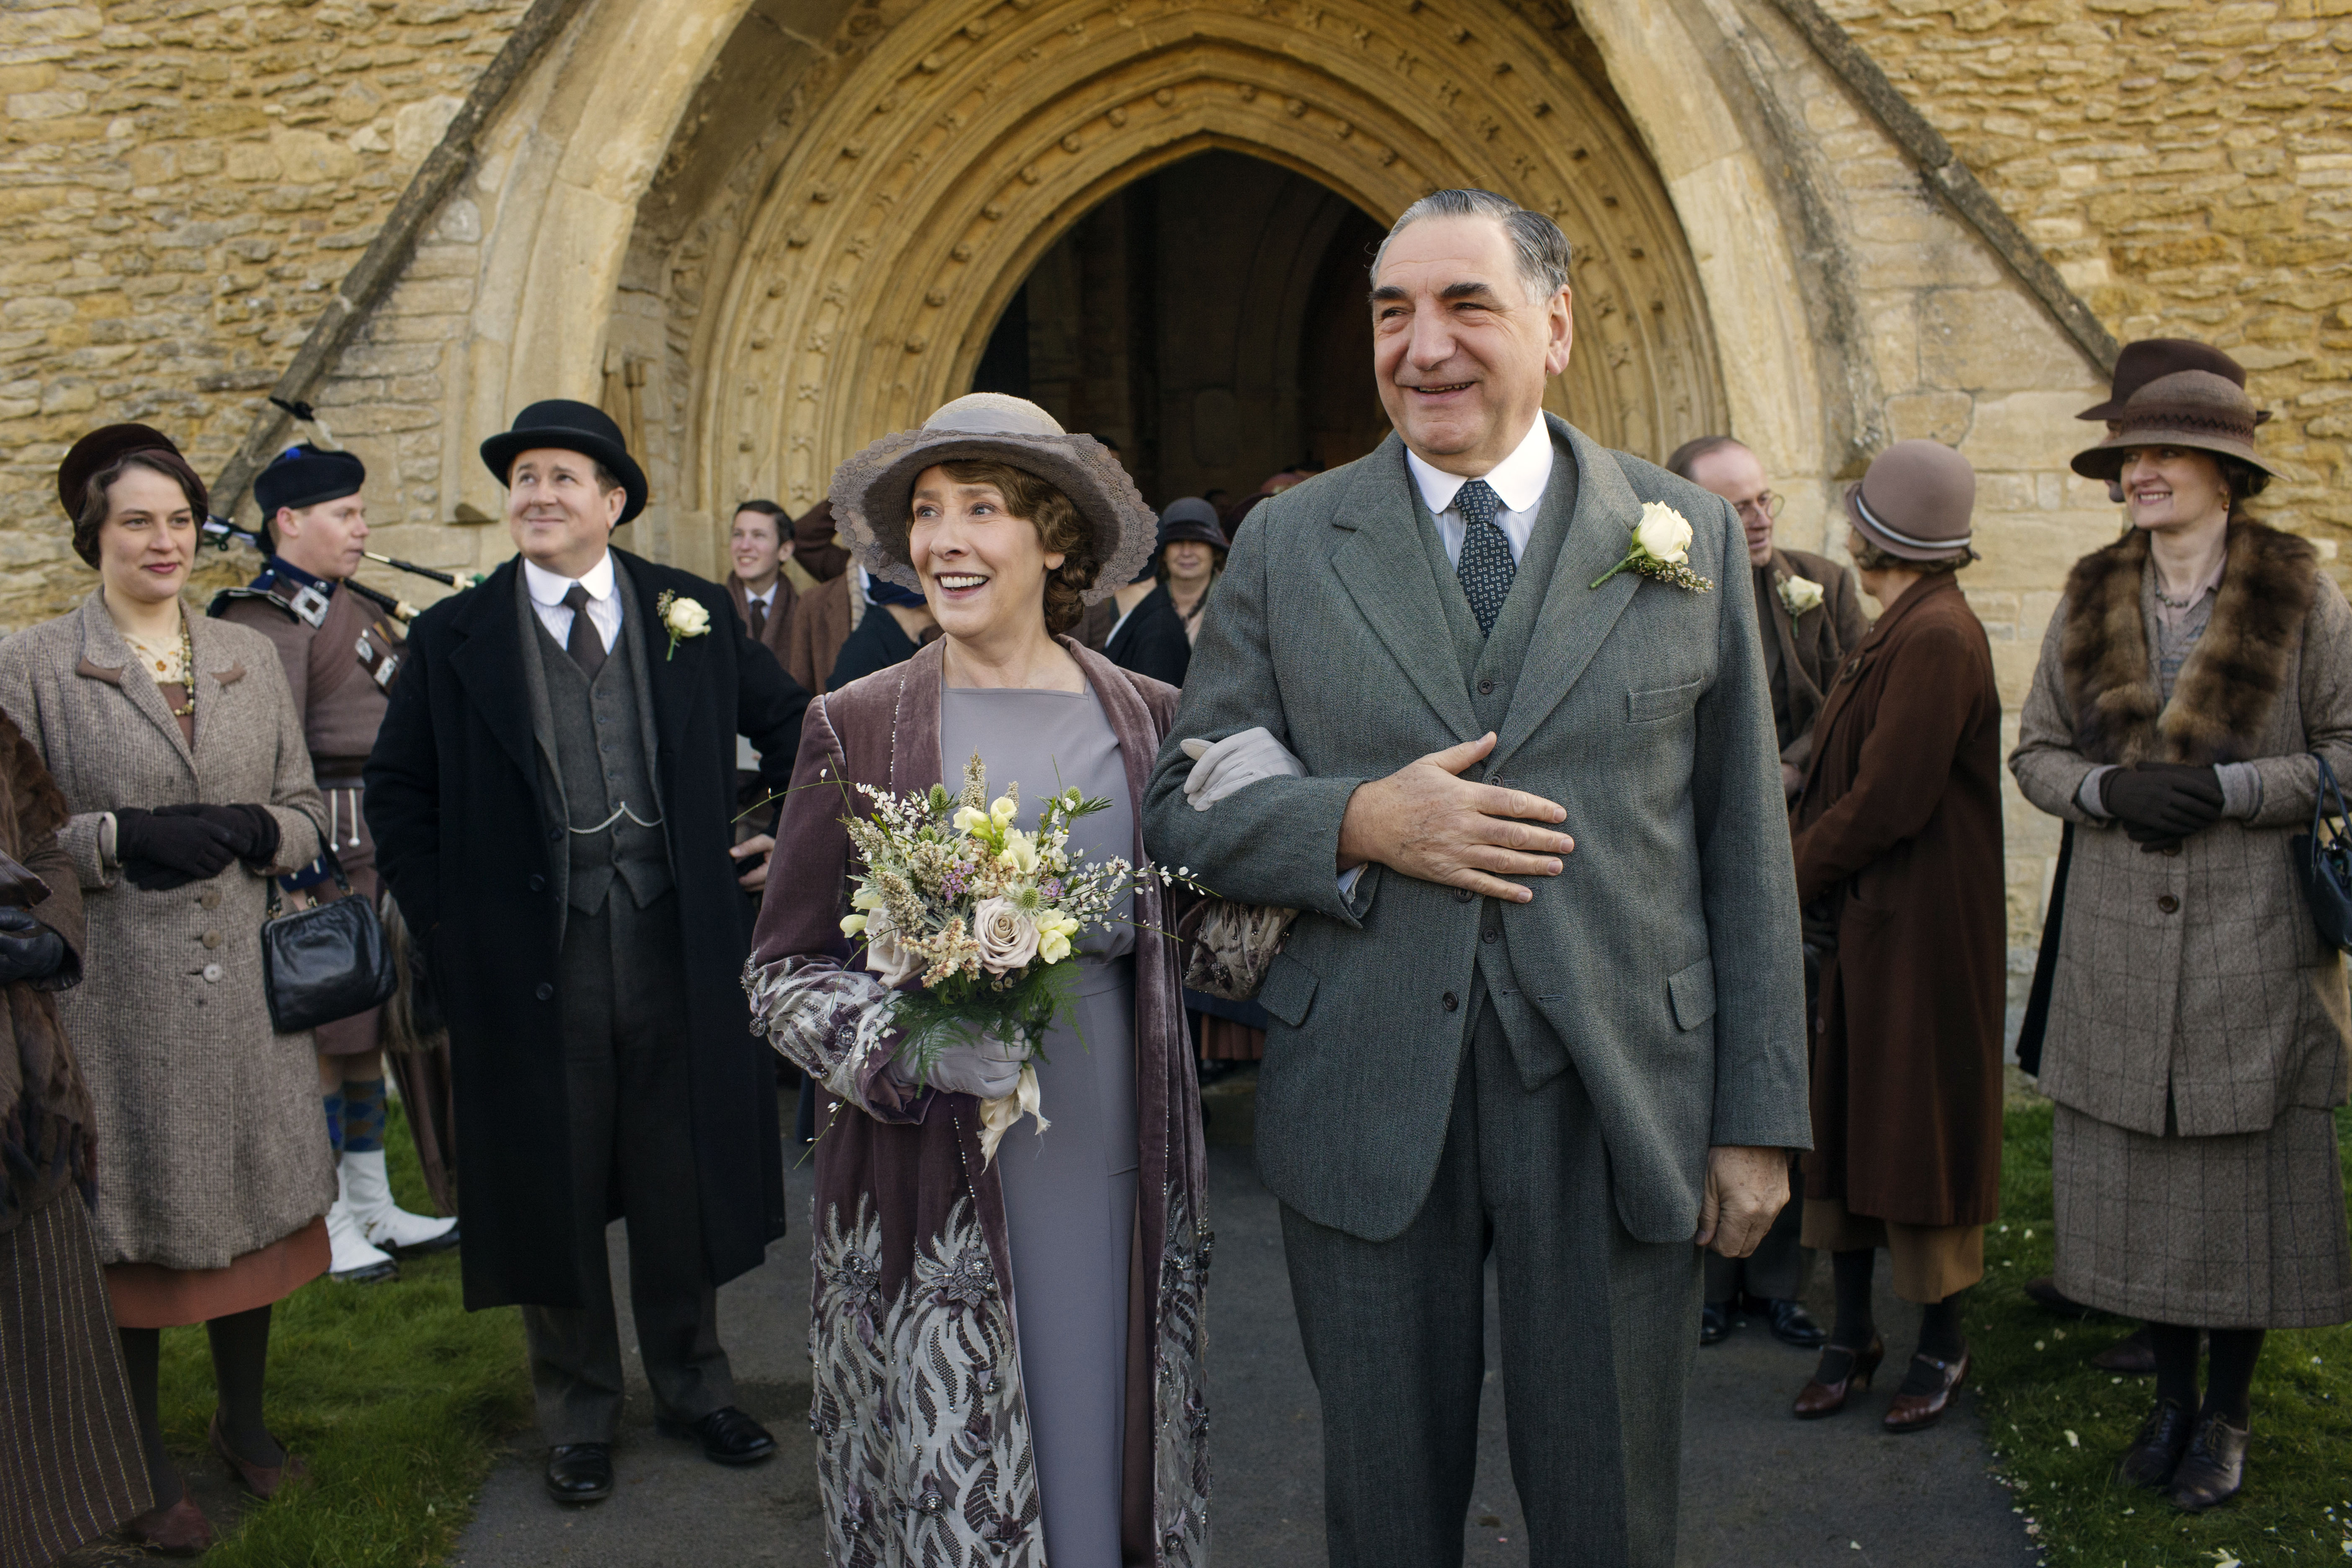 When did season one of Downton Abbey start showing on TV in the U.S. ?